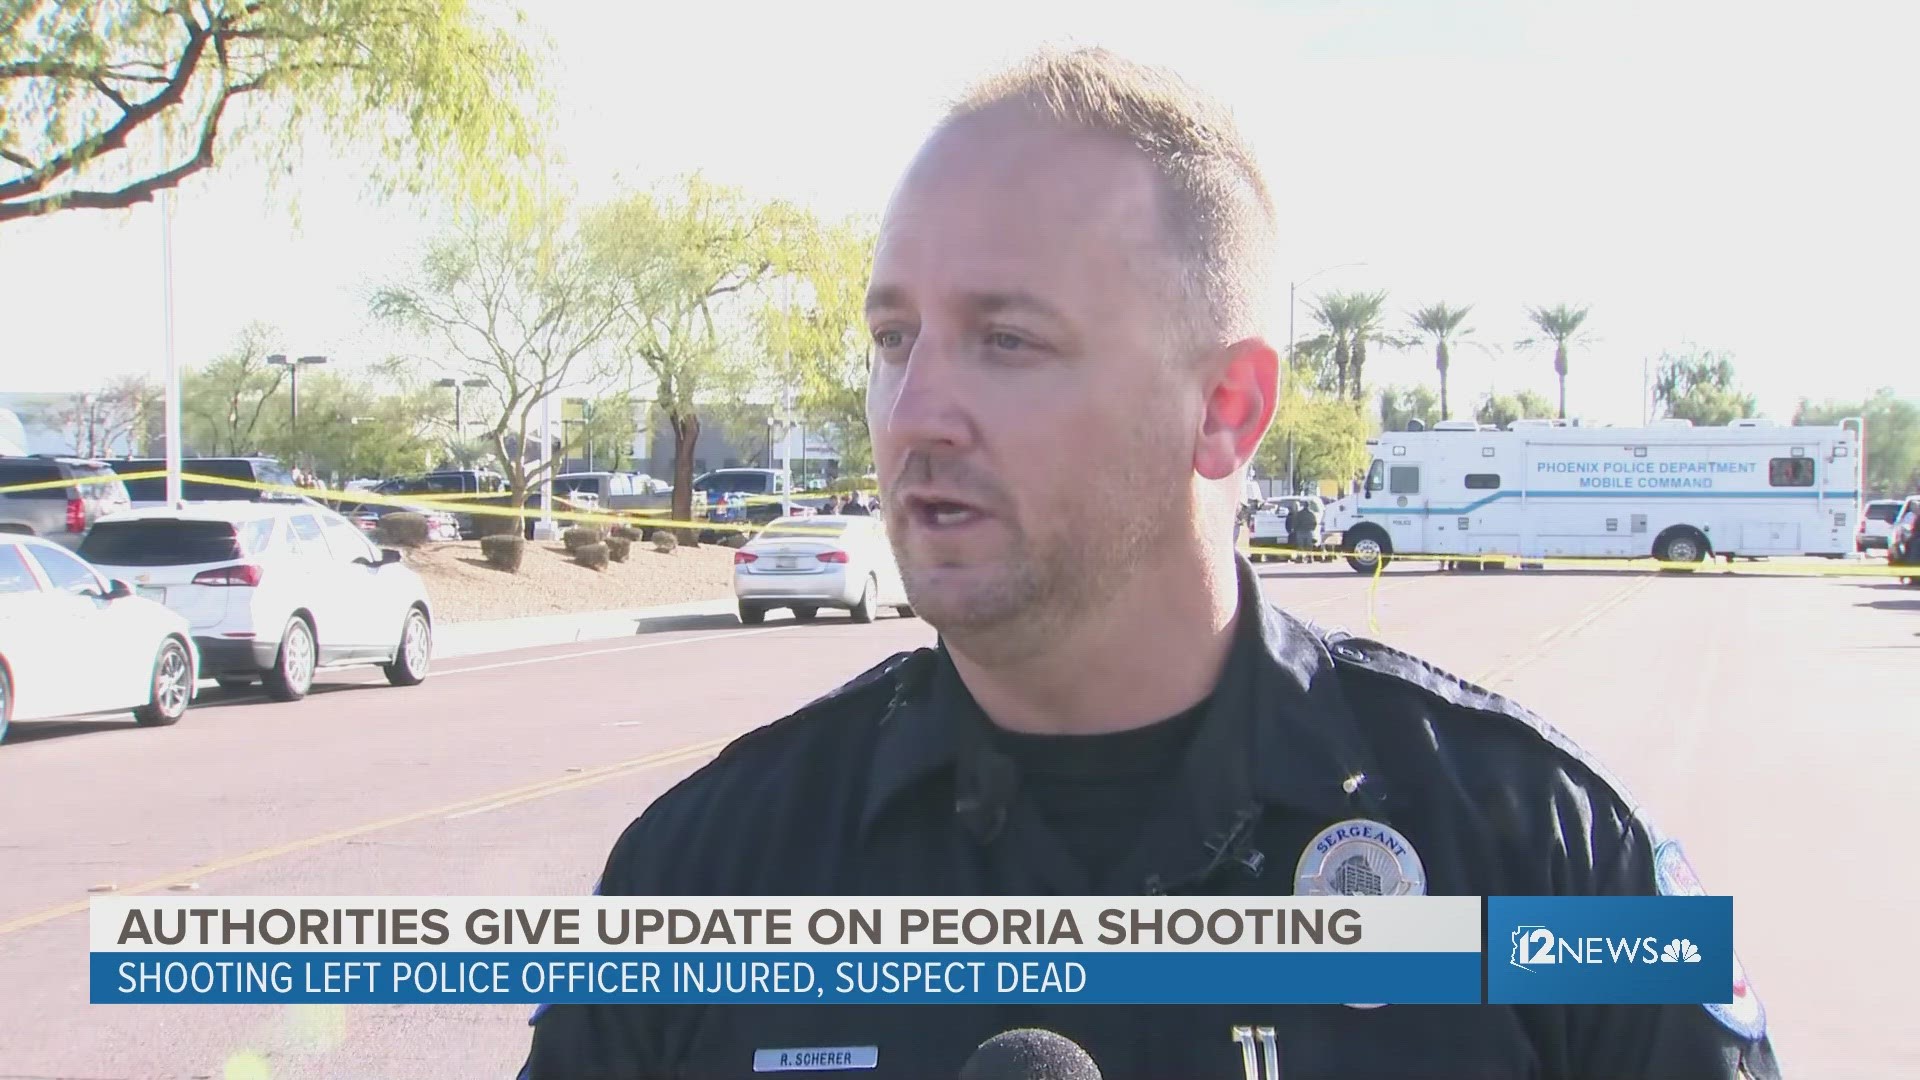 The Phoenix police department gave additional details at the scene of the shooting in Peoria that injured an officer and killed a suspect.